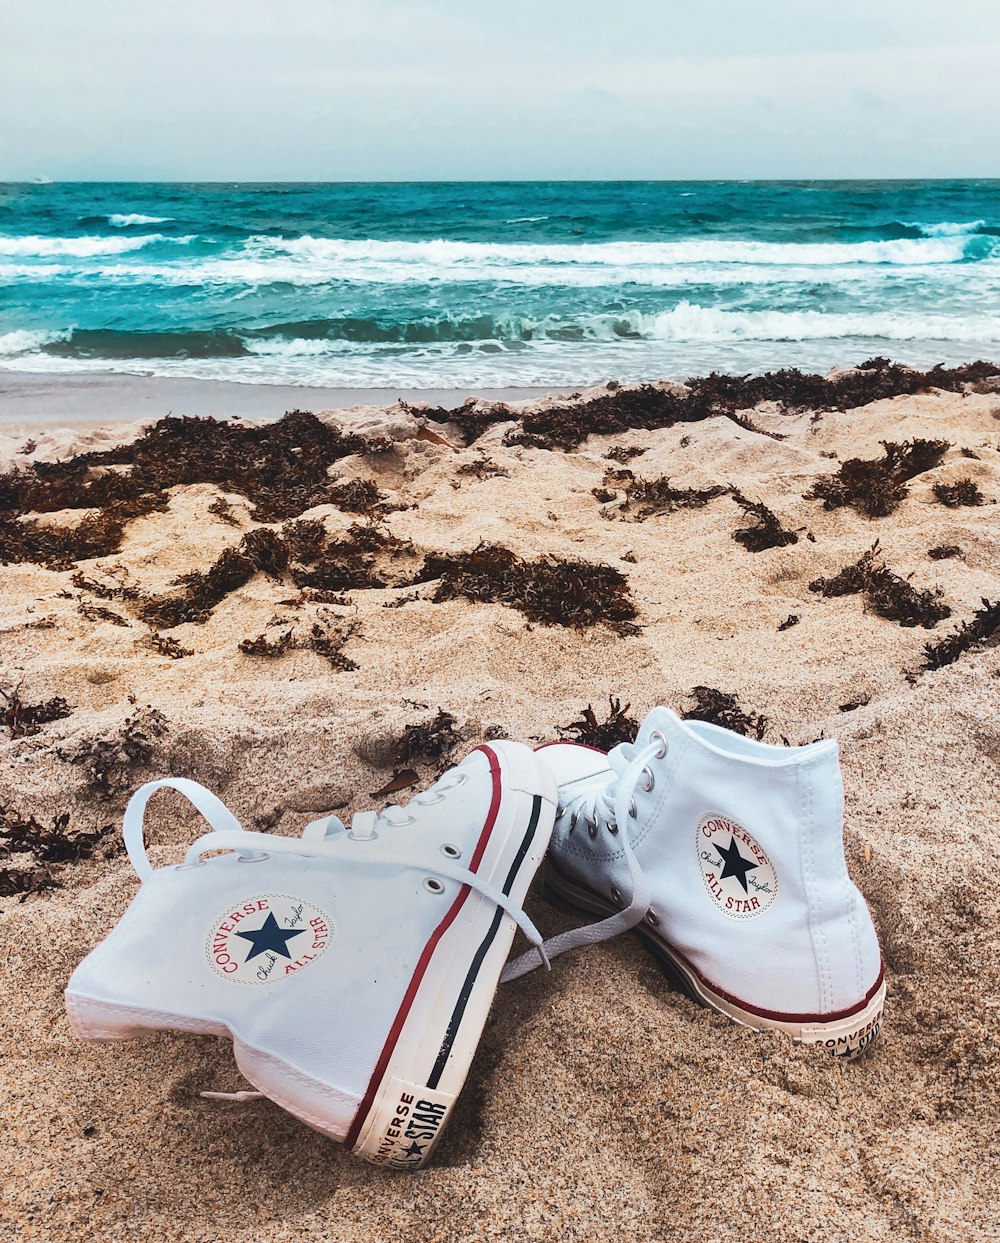 White converse all star high top sneakers on beach shore photo – Free  Singer island Image on Unsplash